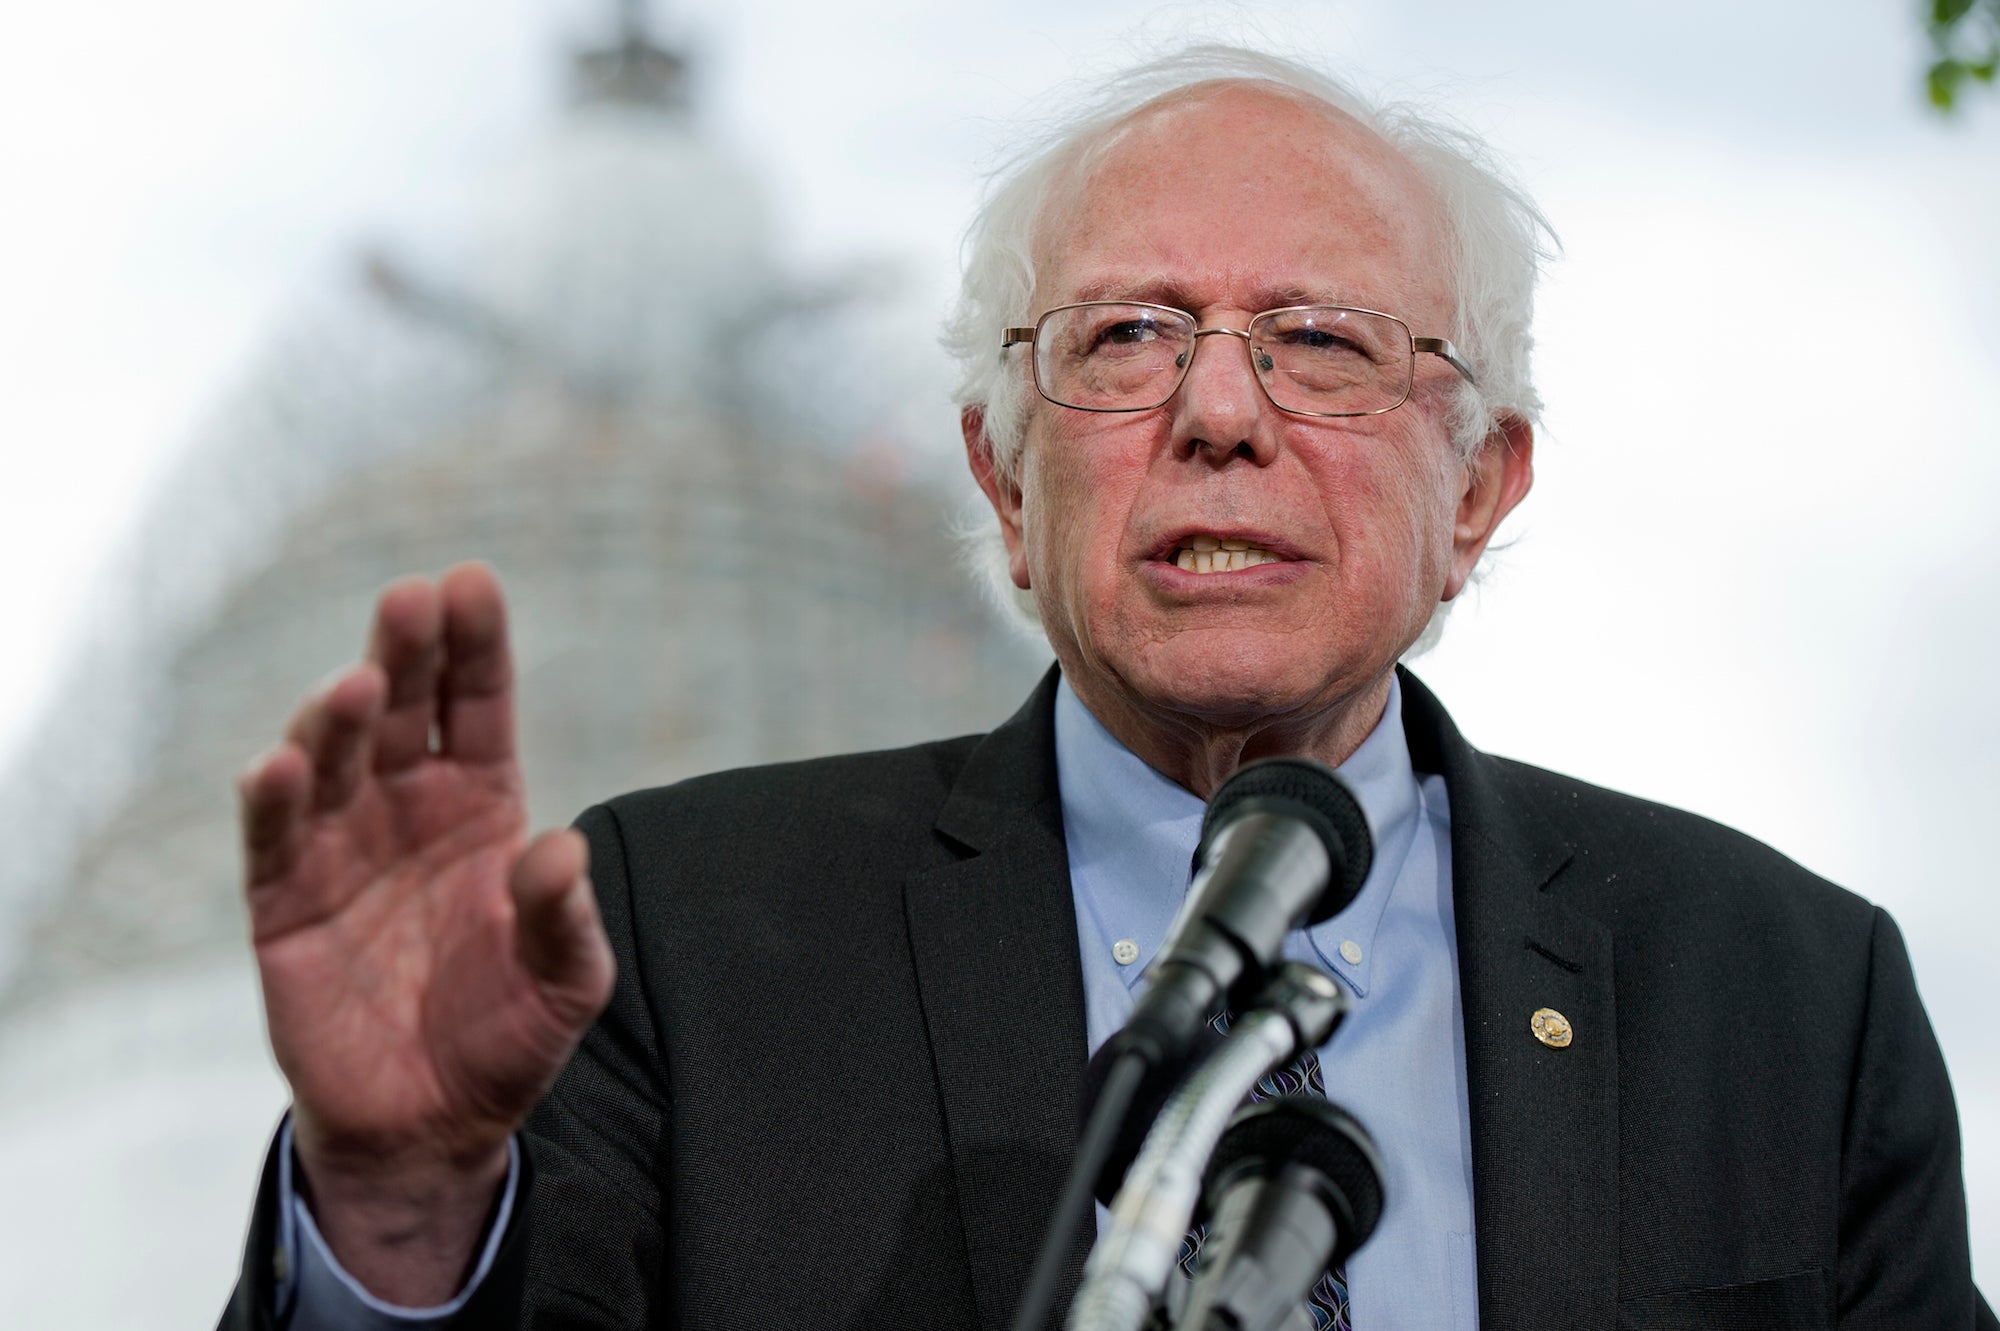 Bernie Sanders wants every woman to be offered 12 weeks of paid maternity leave